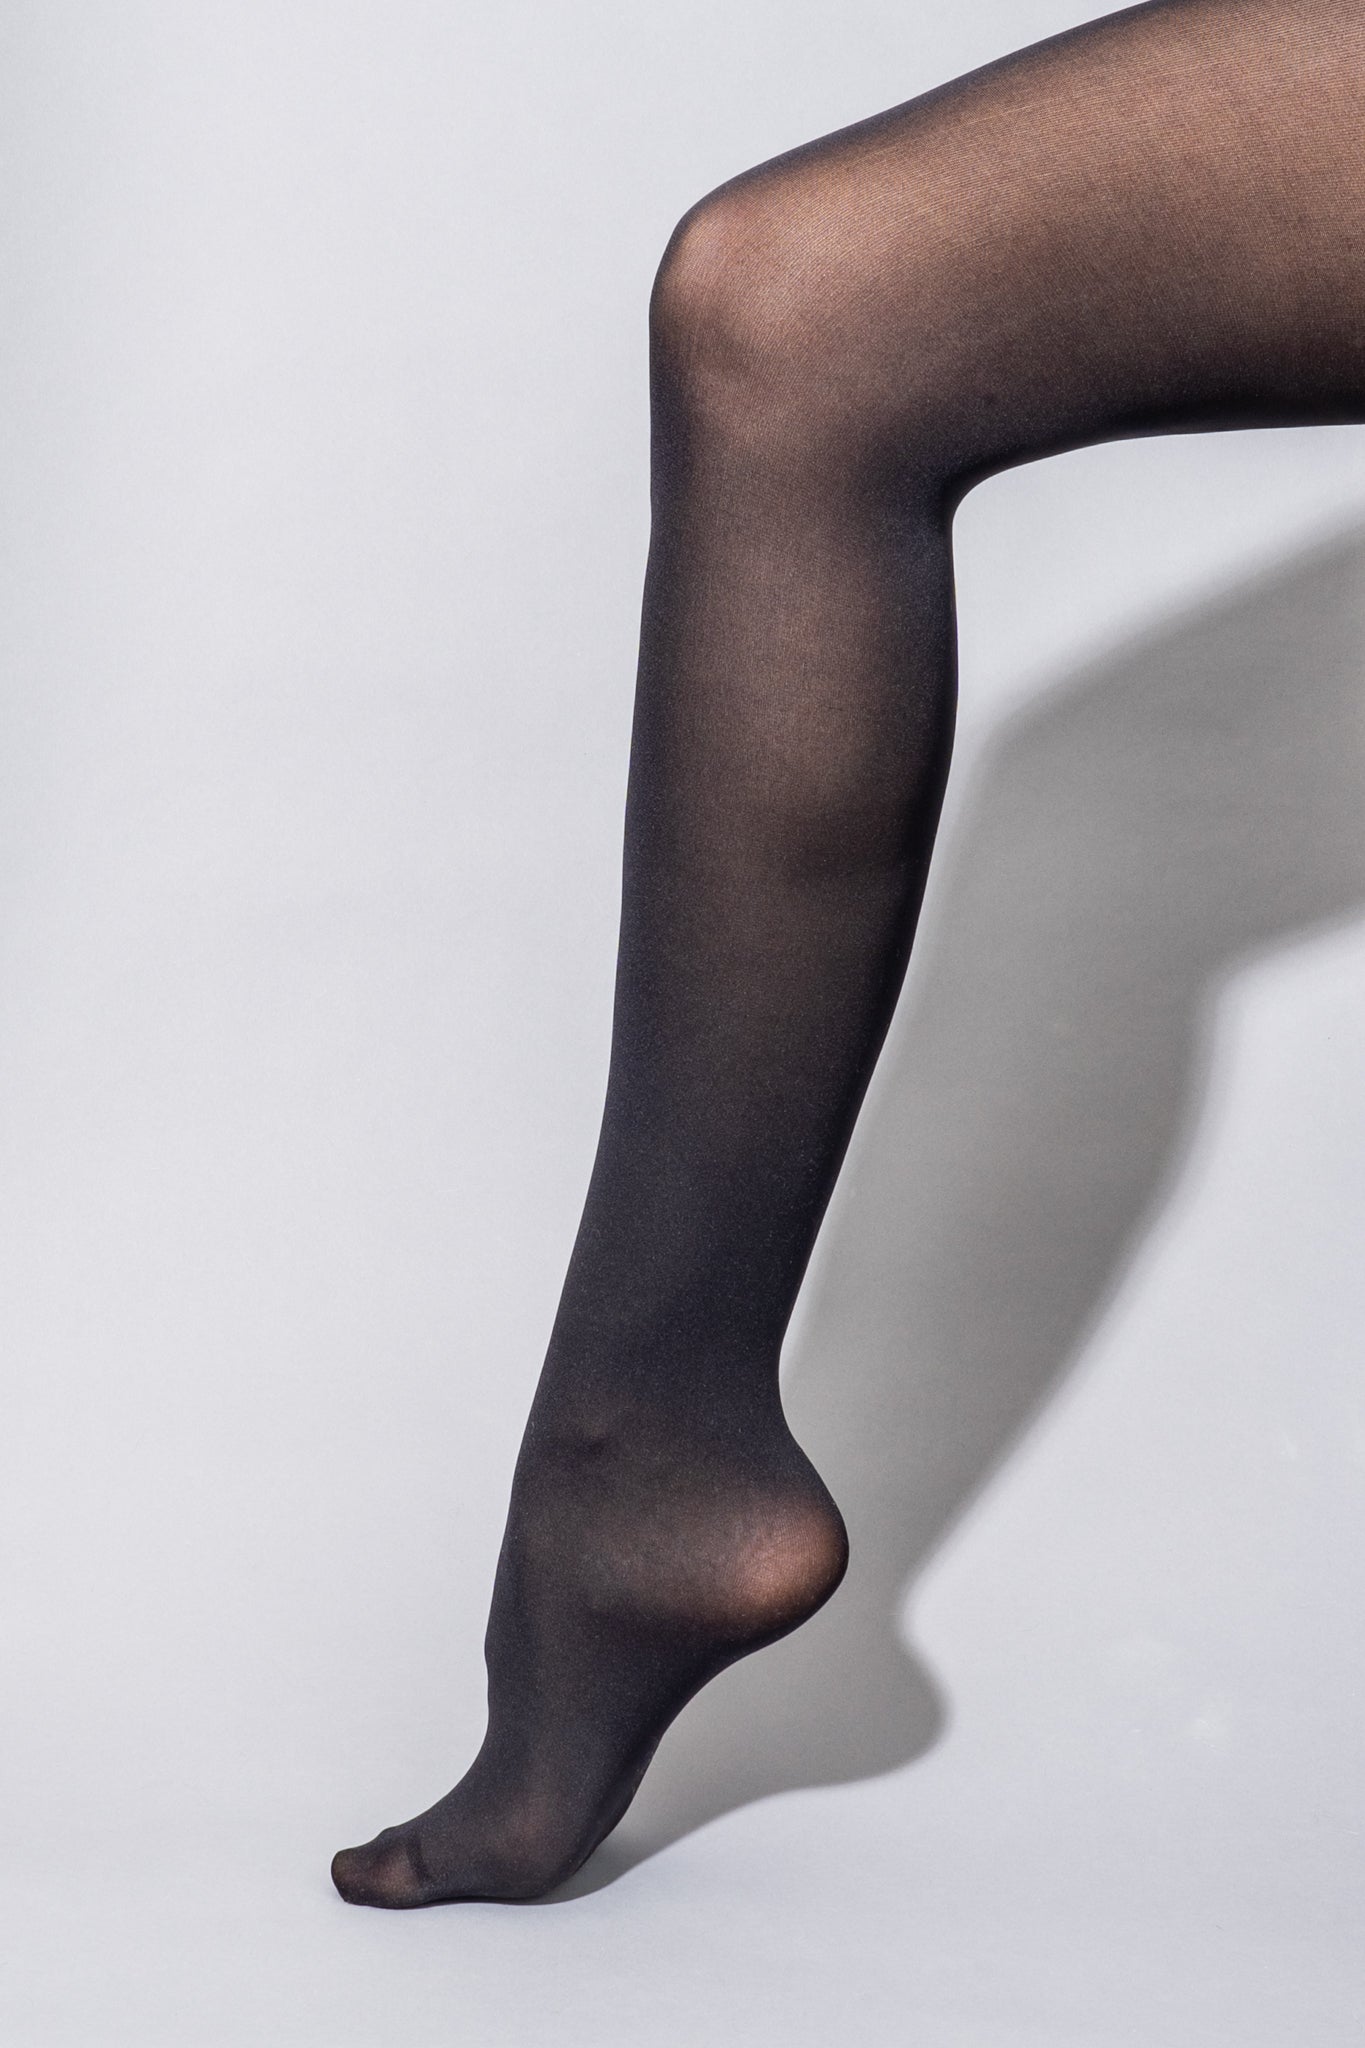 claire brewin recommends women wearing black nylons pic